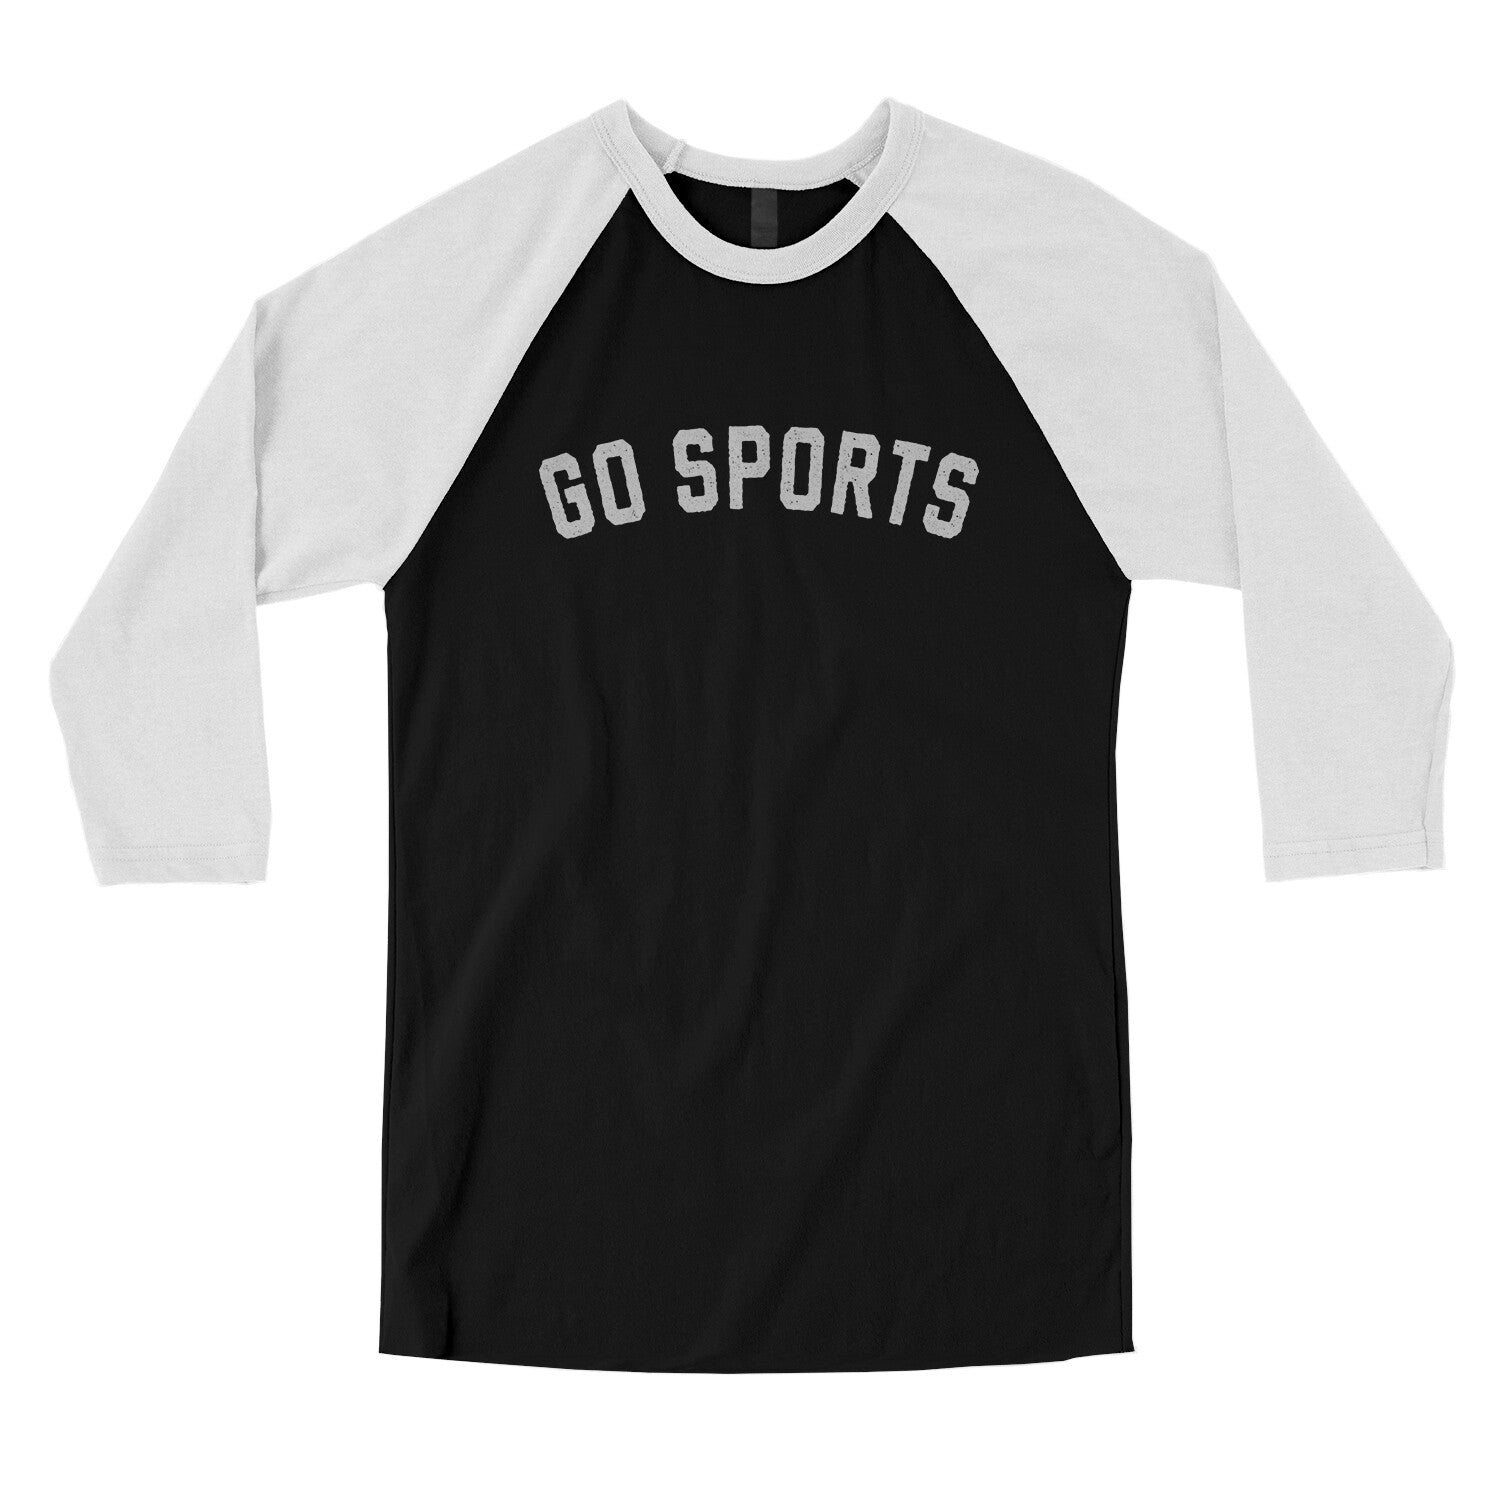 Go Sports in Black with White Color